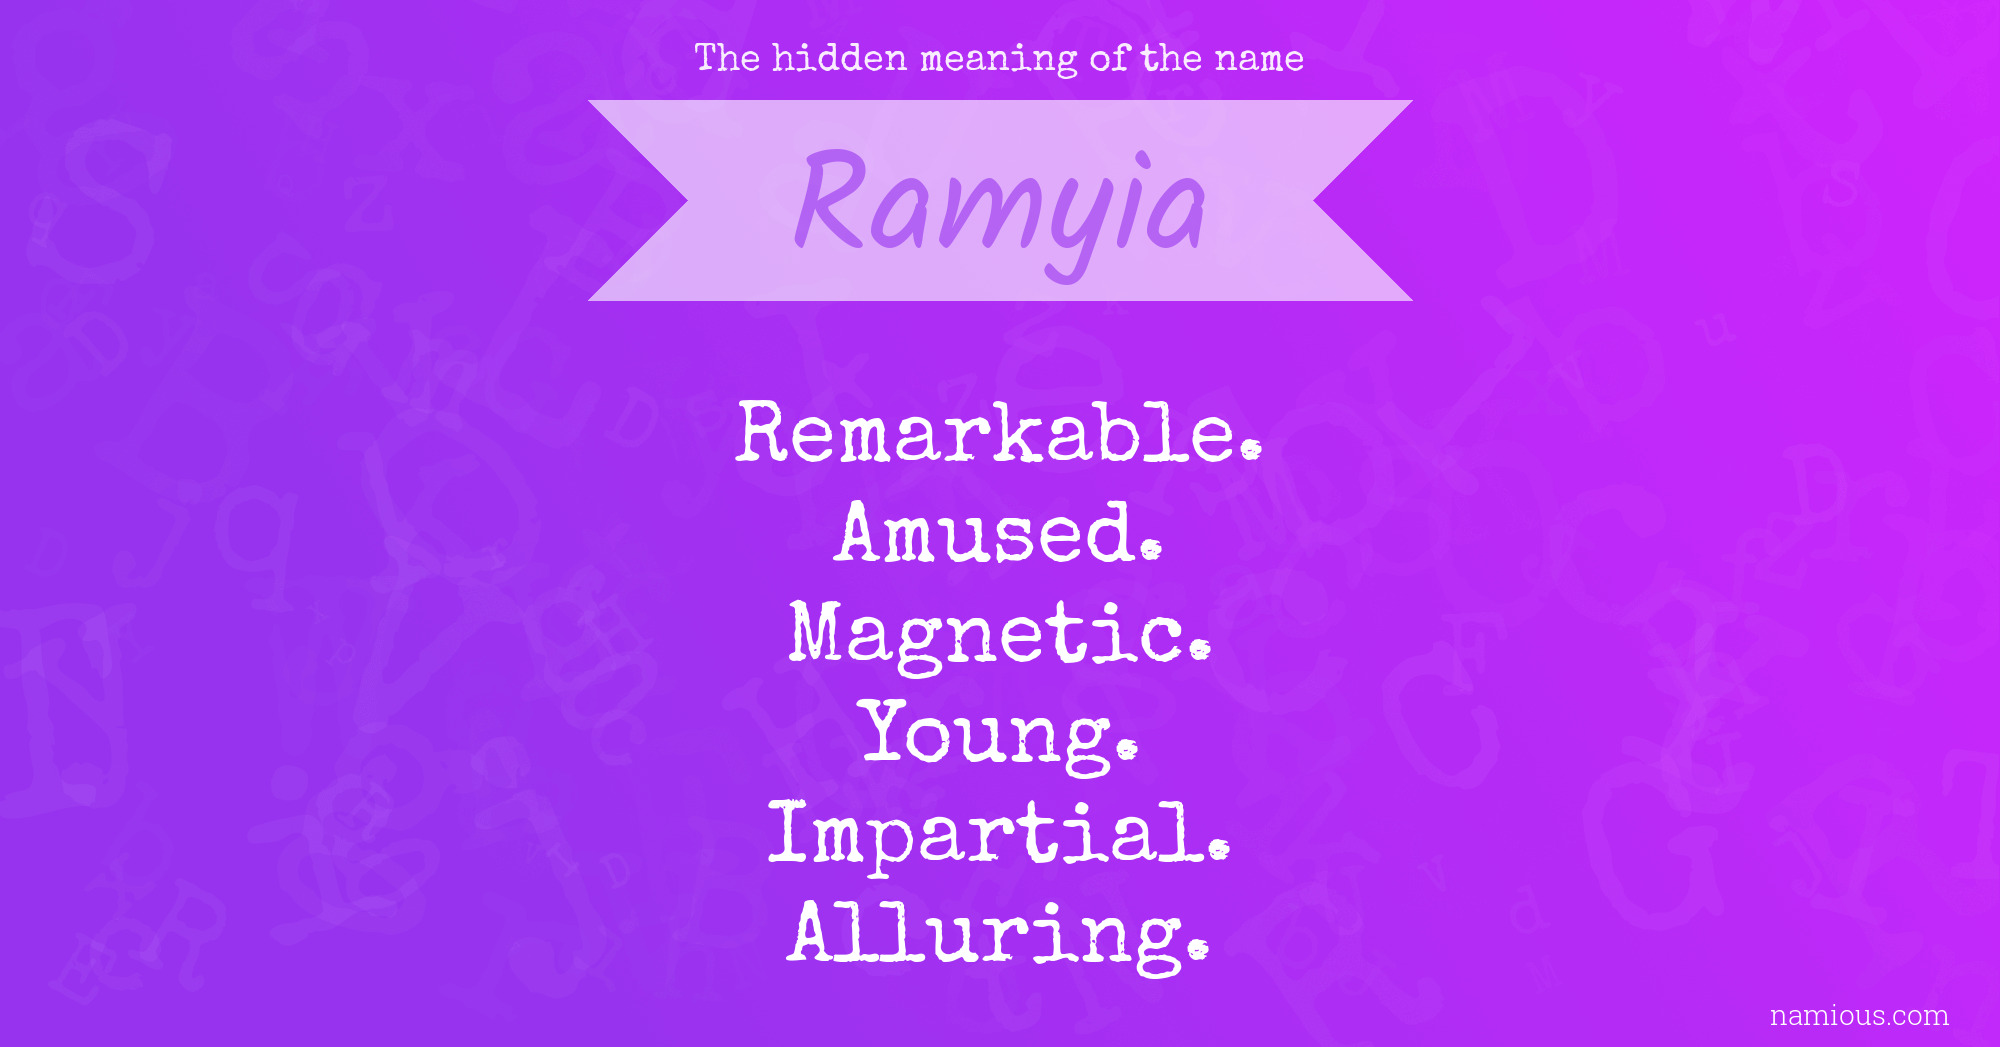 The hidden meaning of the name Ramyia